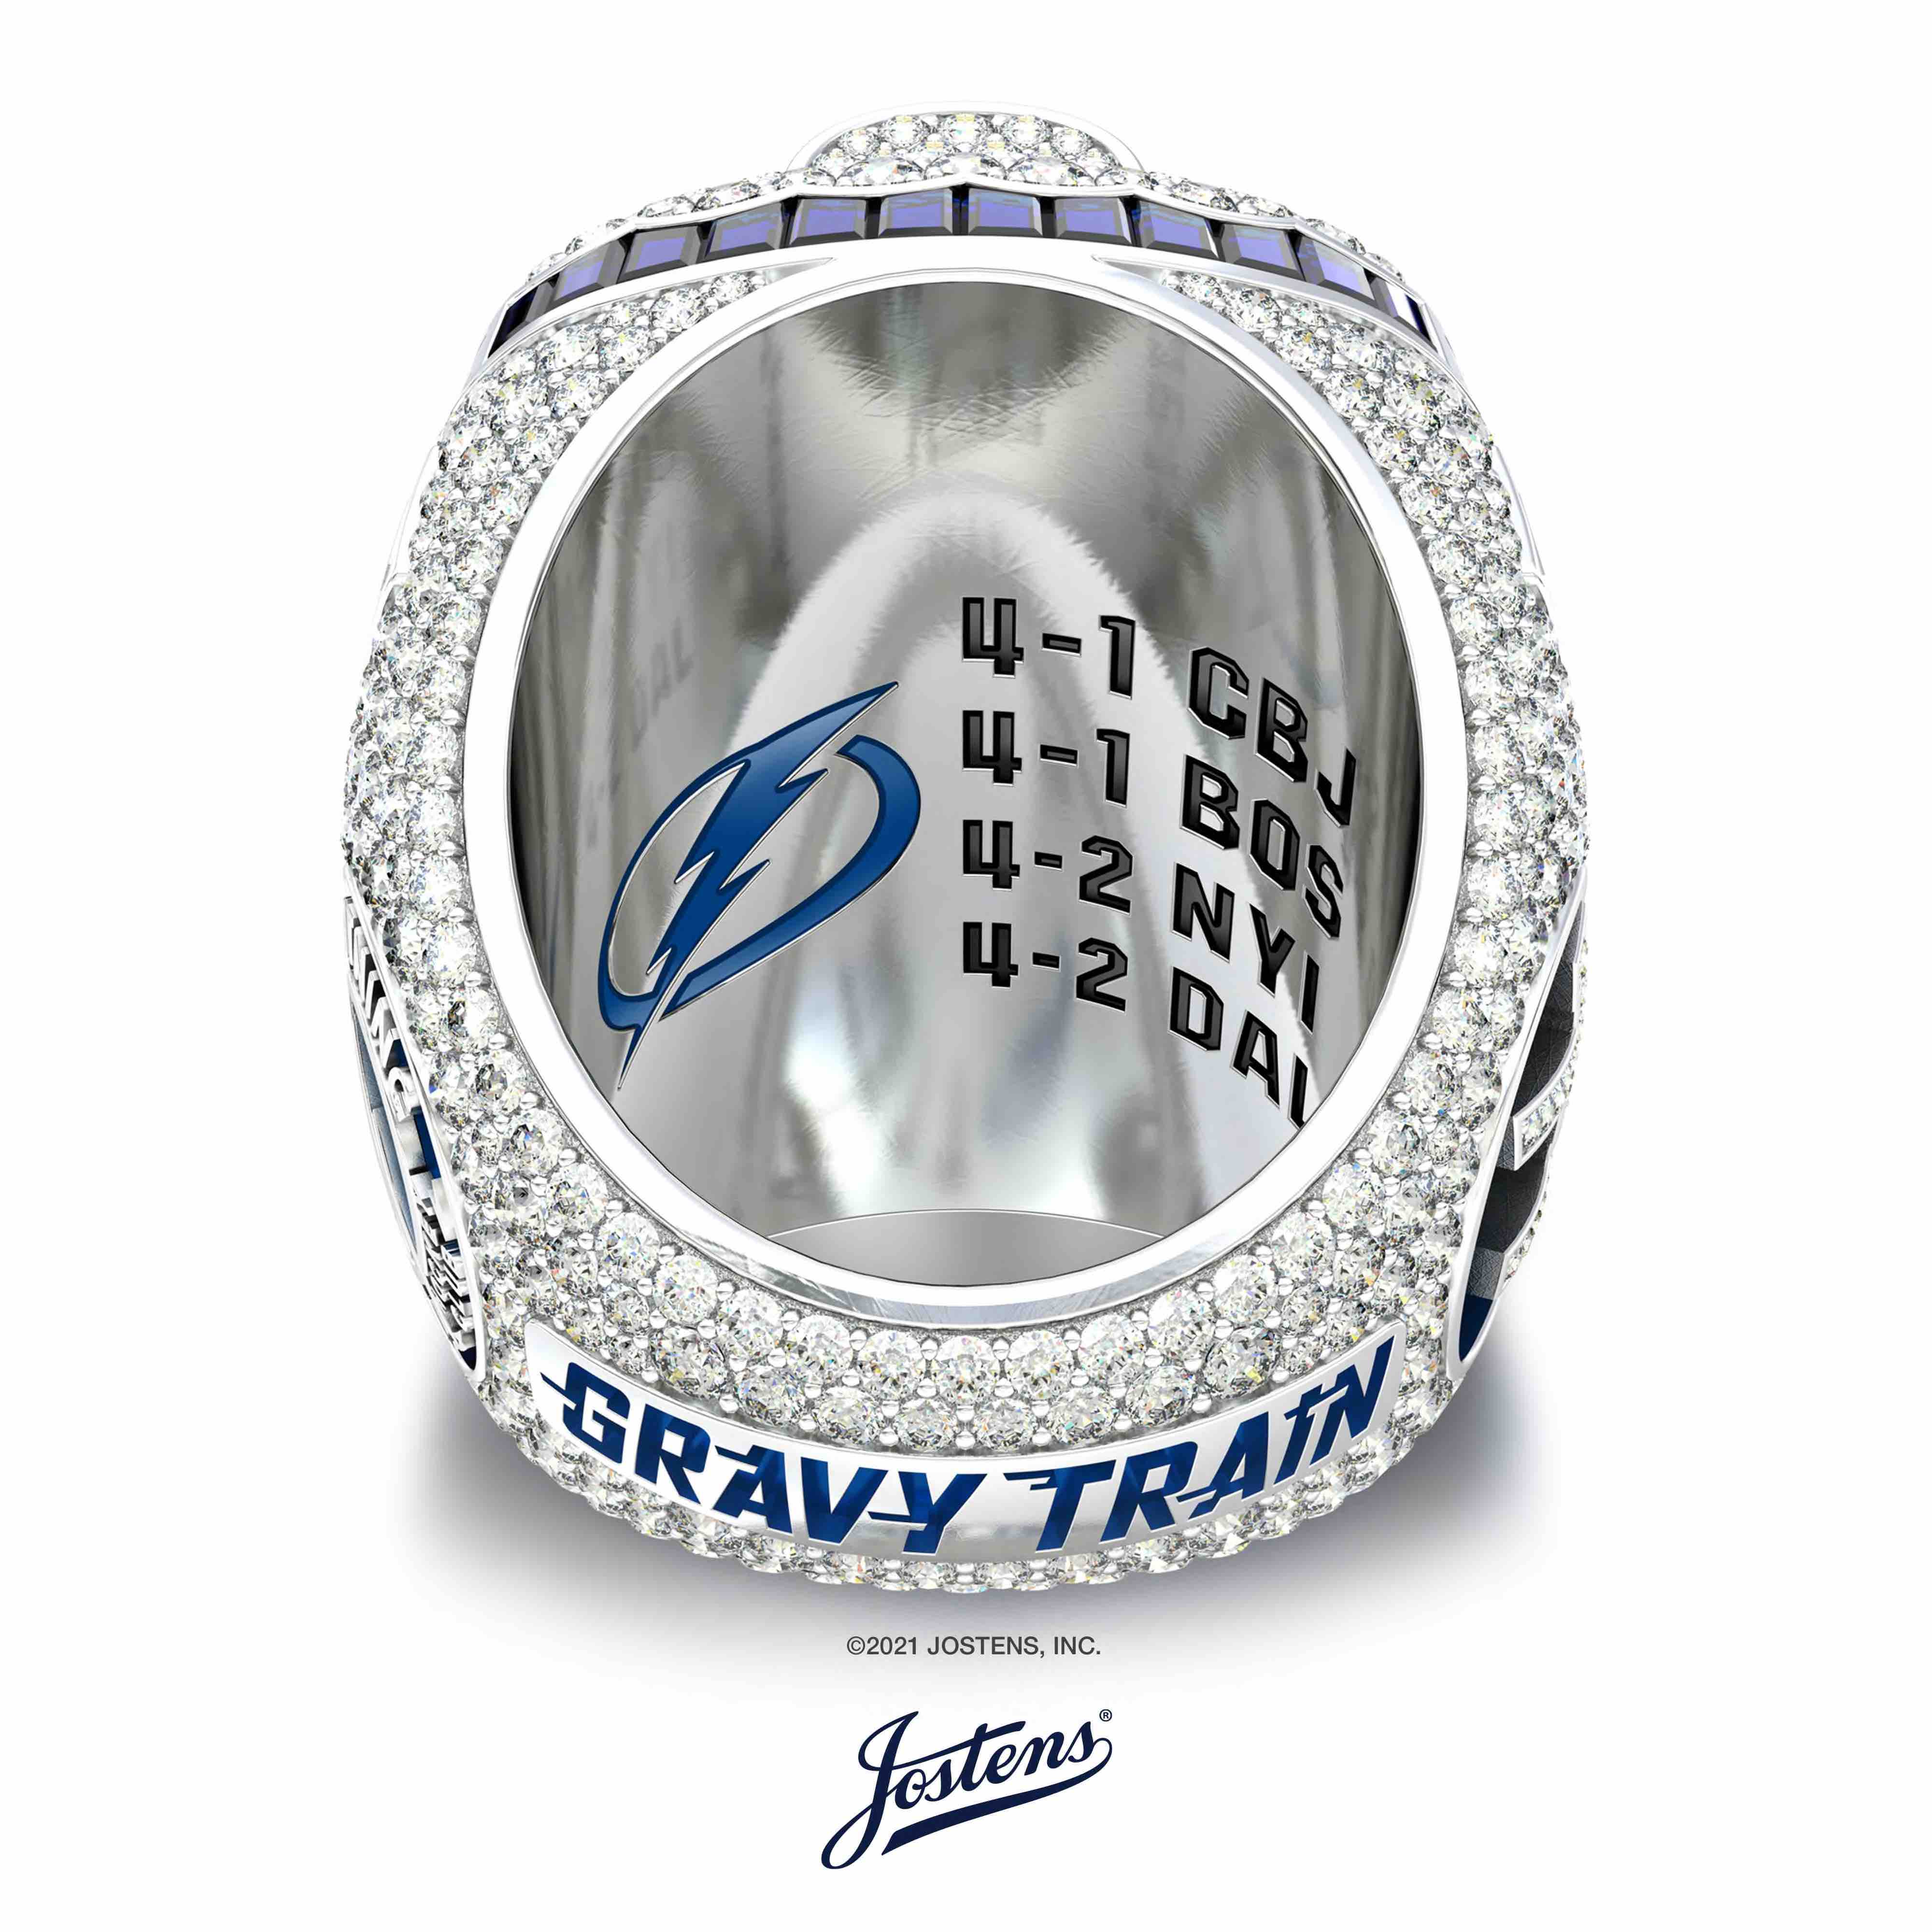 Inside detail of the Tampa Bay Lightning's 2020 Stanley Cup Championship Ring by Jostens  